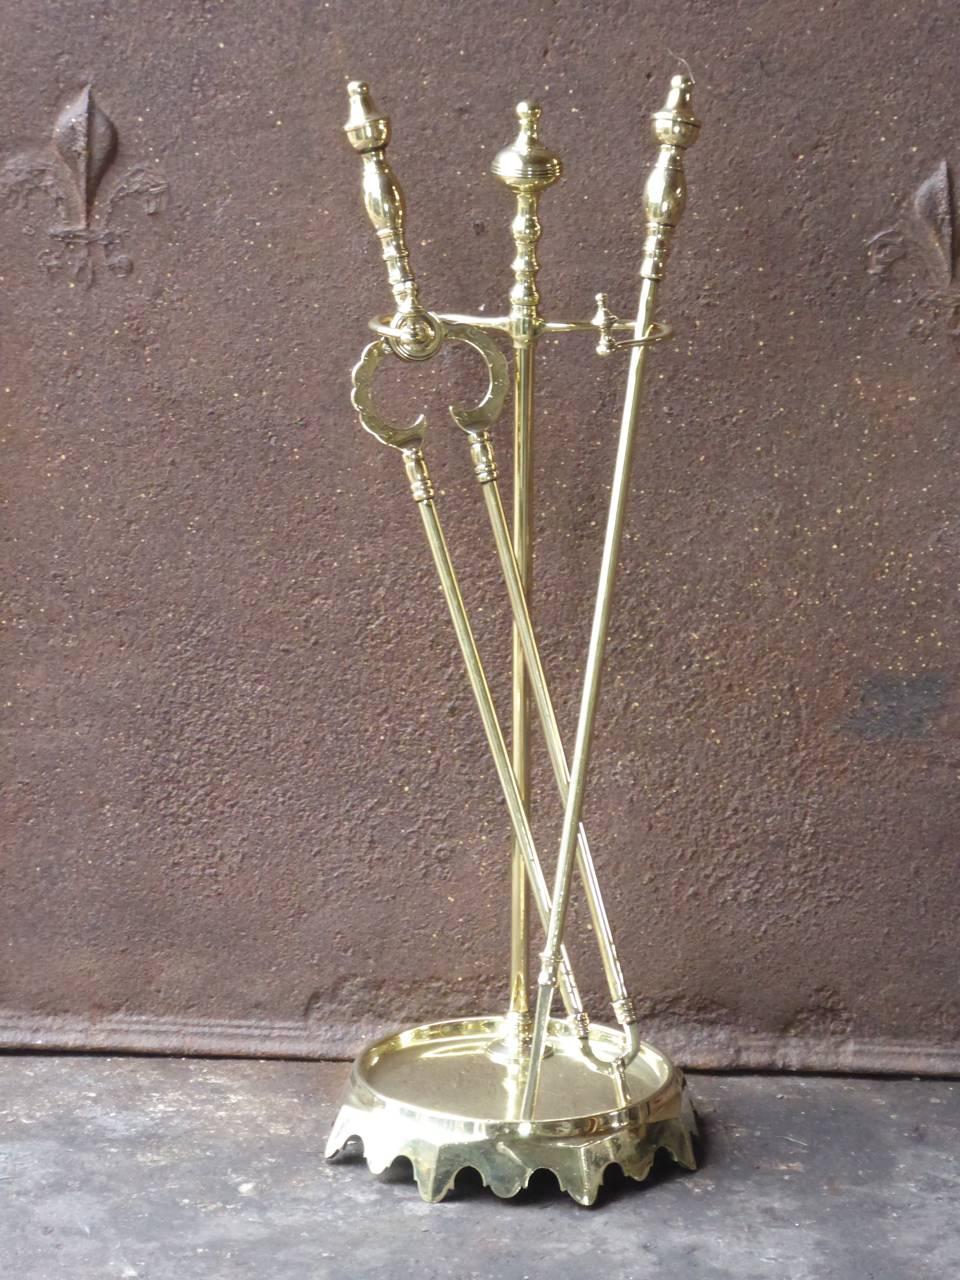 19th century English Victorian fireplace tool set, companion set made of polished brass.

We have a unique and specialized collection of antique and used fireplace accessories consisting of more than 1000 listings at 1stdibs. Amongst others, we